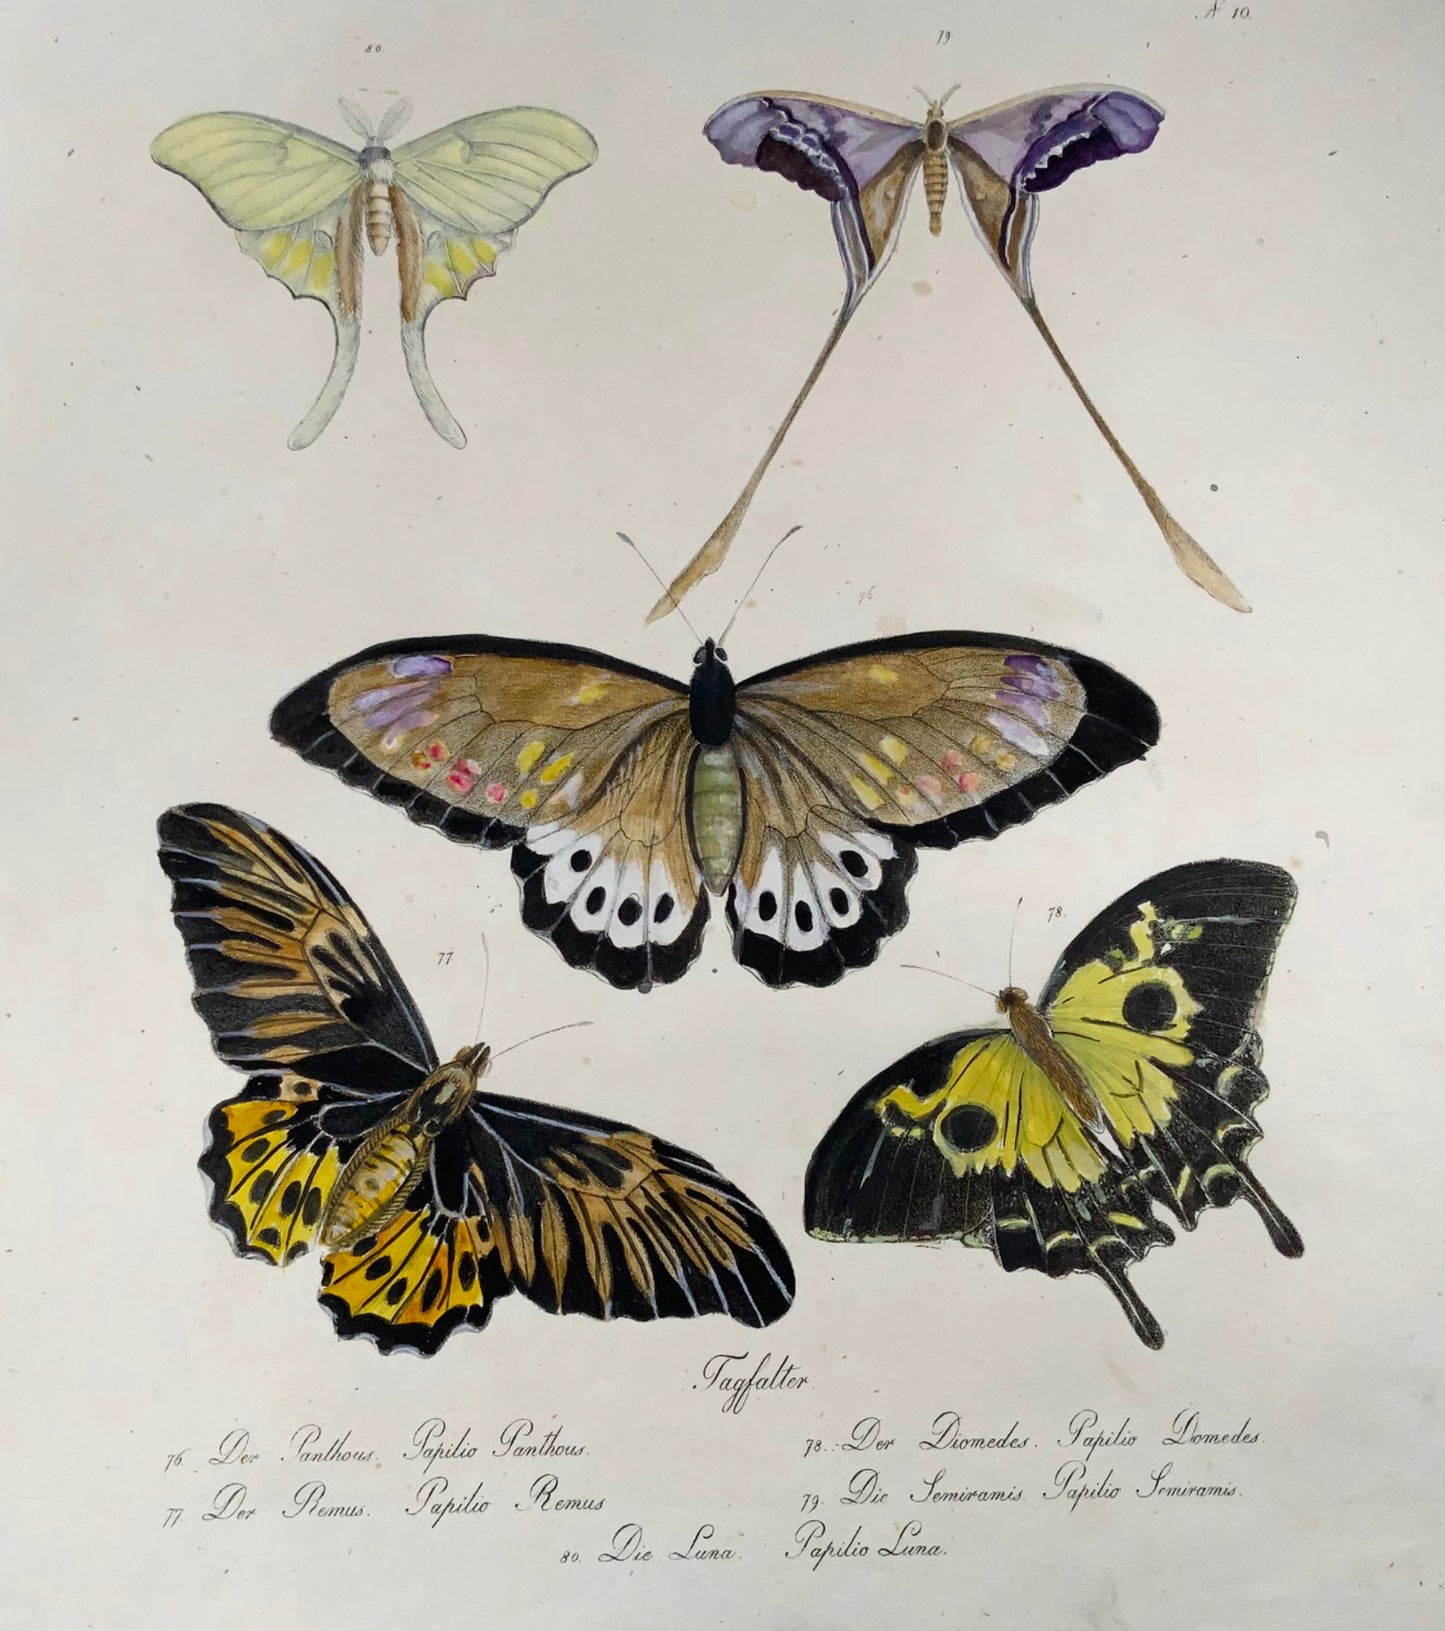 1816 Butterflies, imperial folio, 42.5 cm, incunabula of lithography, scarce, Brodtmann